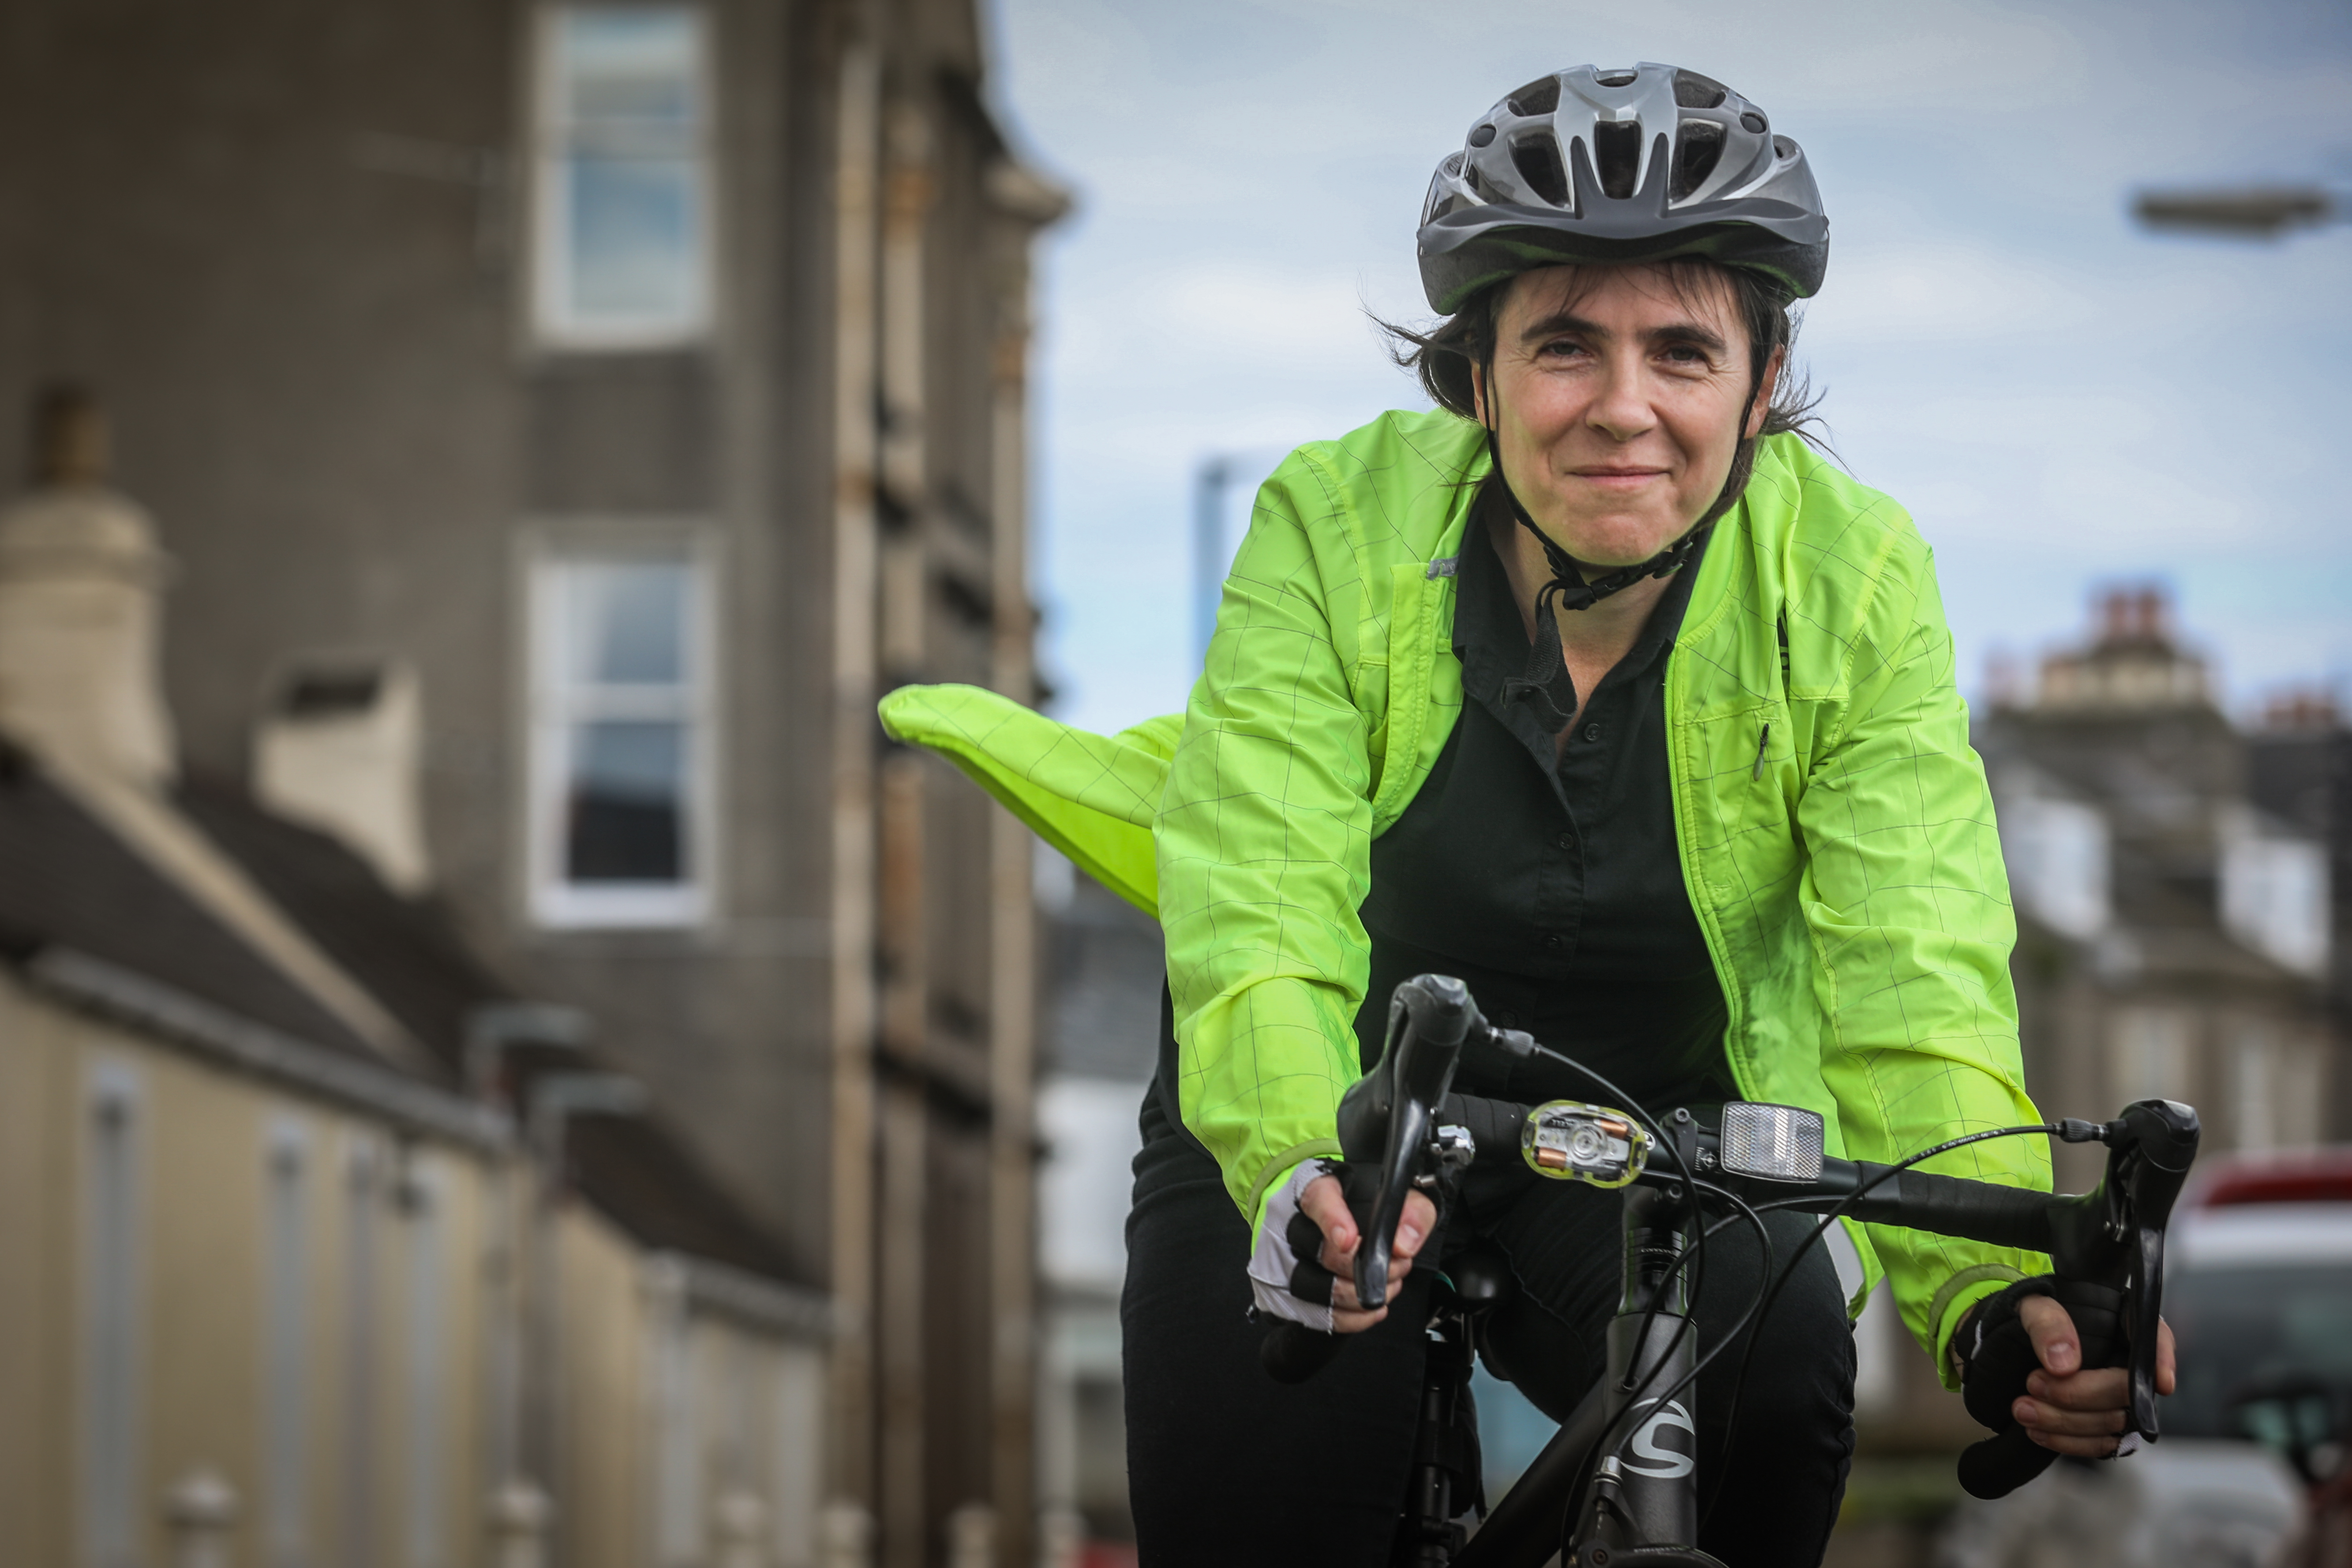 Alice Turpie was named in Cycling UK’s 100 Women in Cycling.